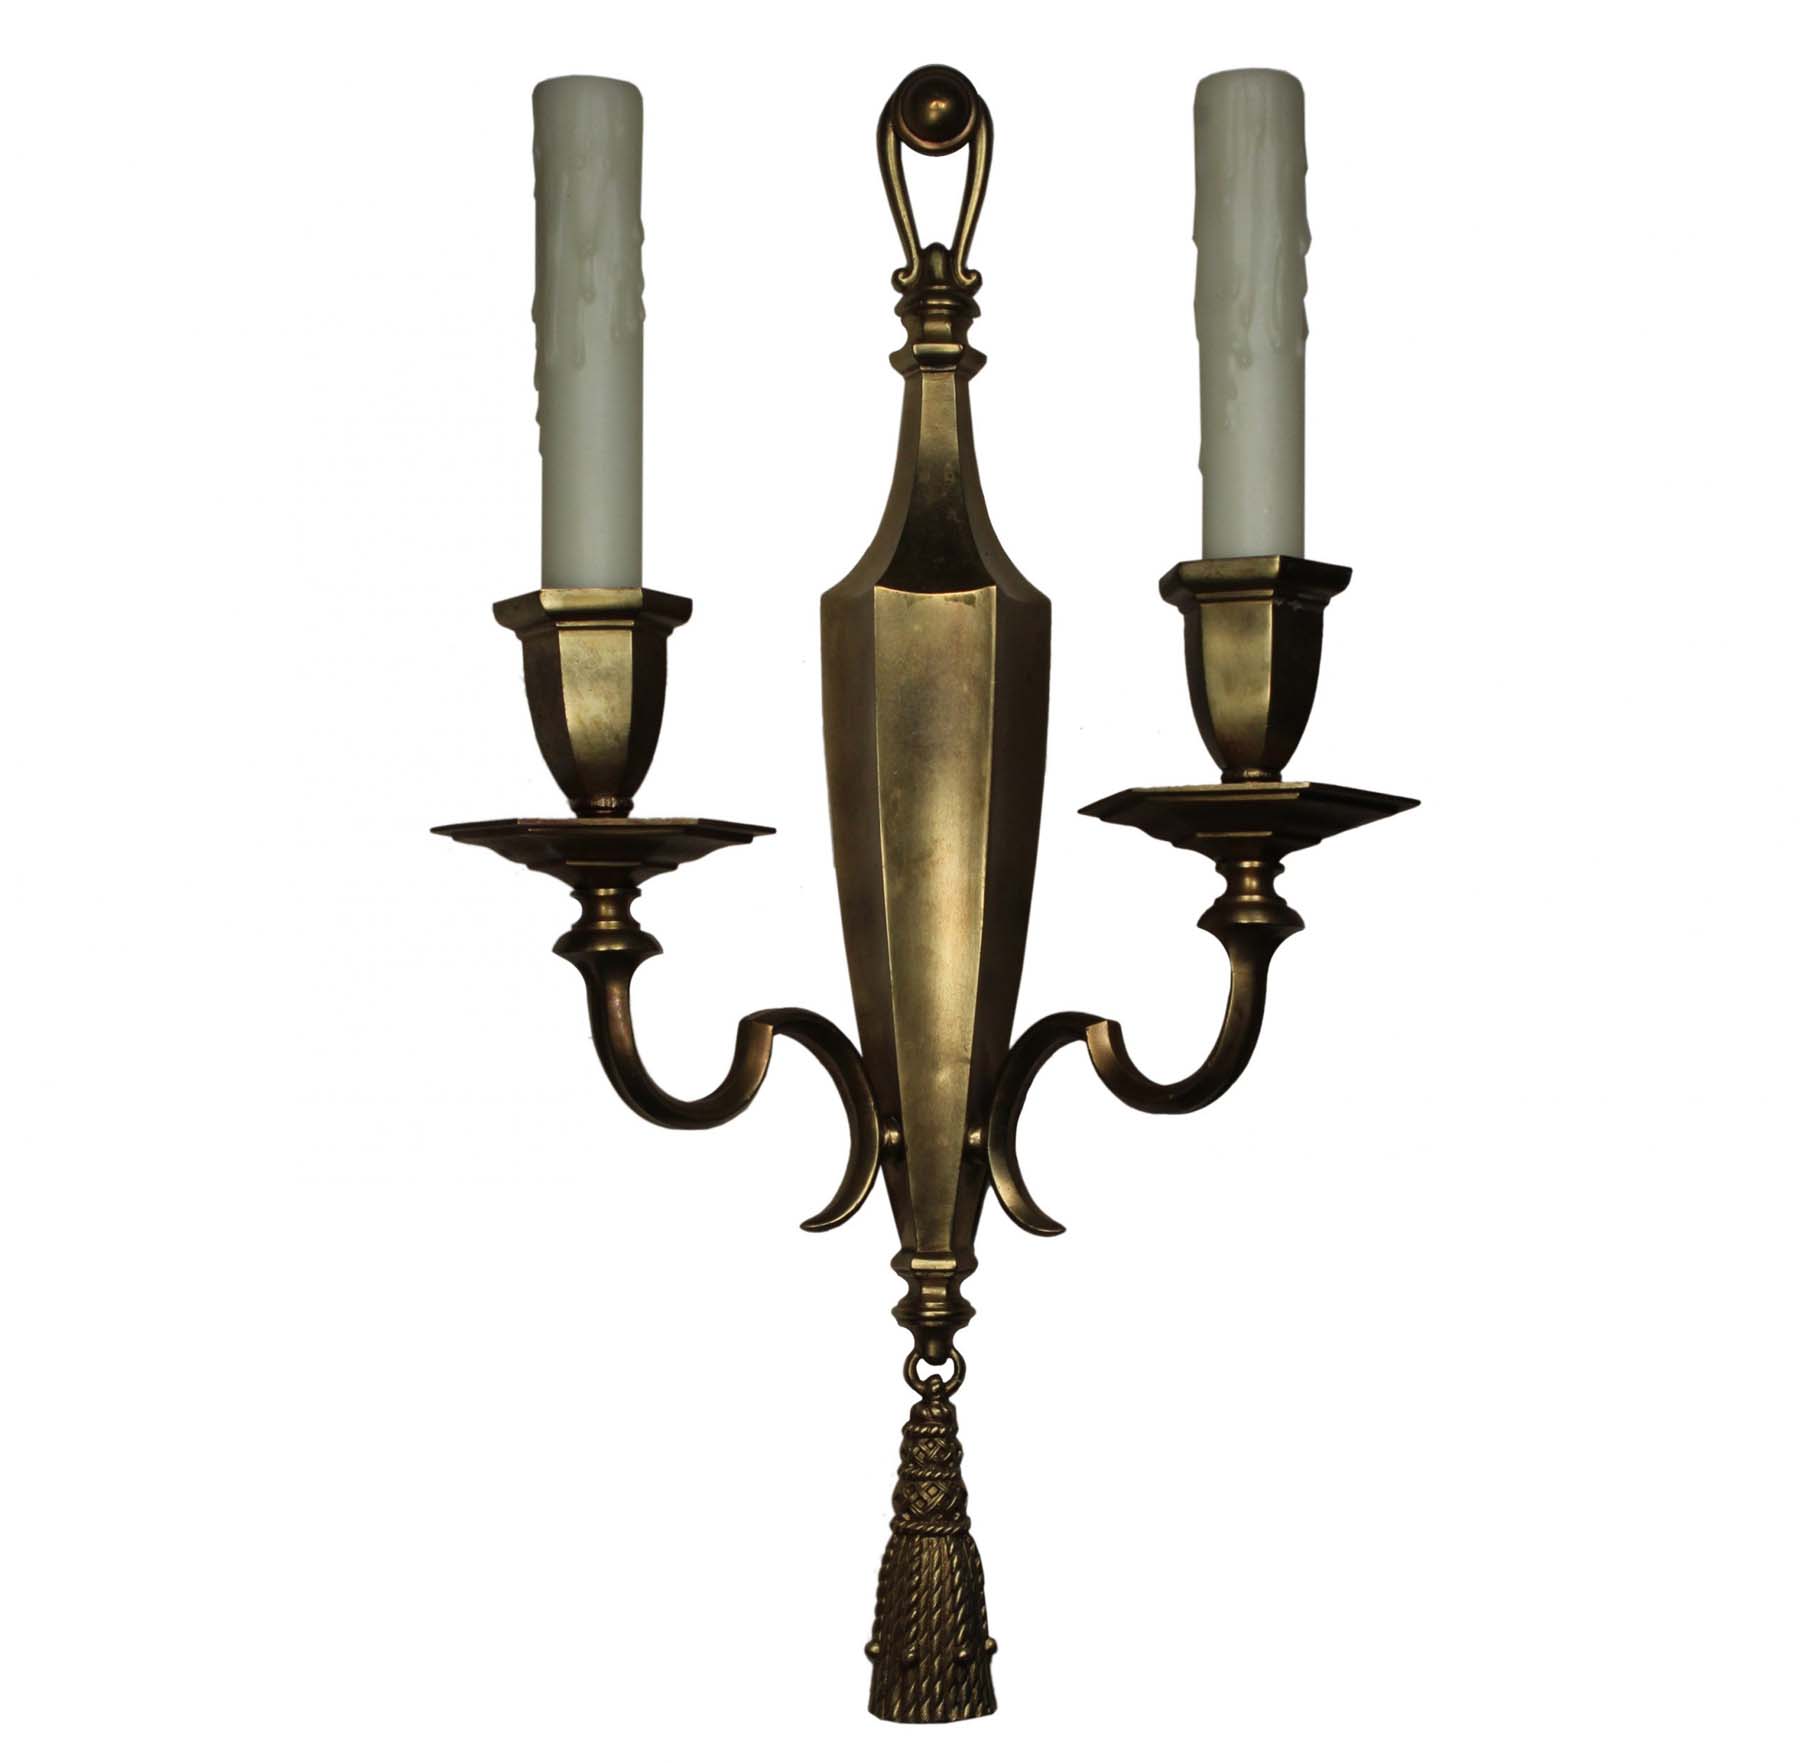 Exceptional Pairs of Antique Double-Arm Sconces, Signed E. F. Caldwell-68338